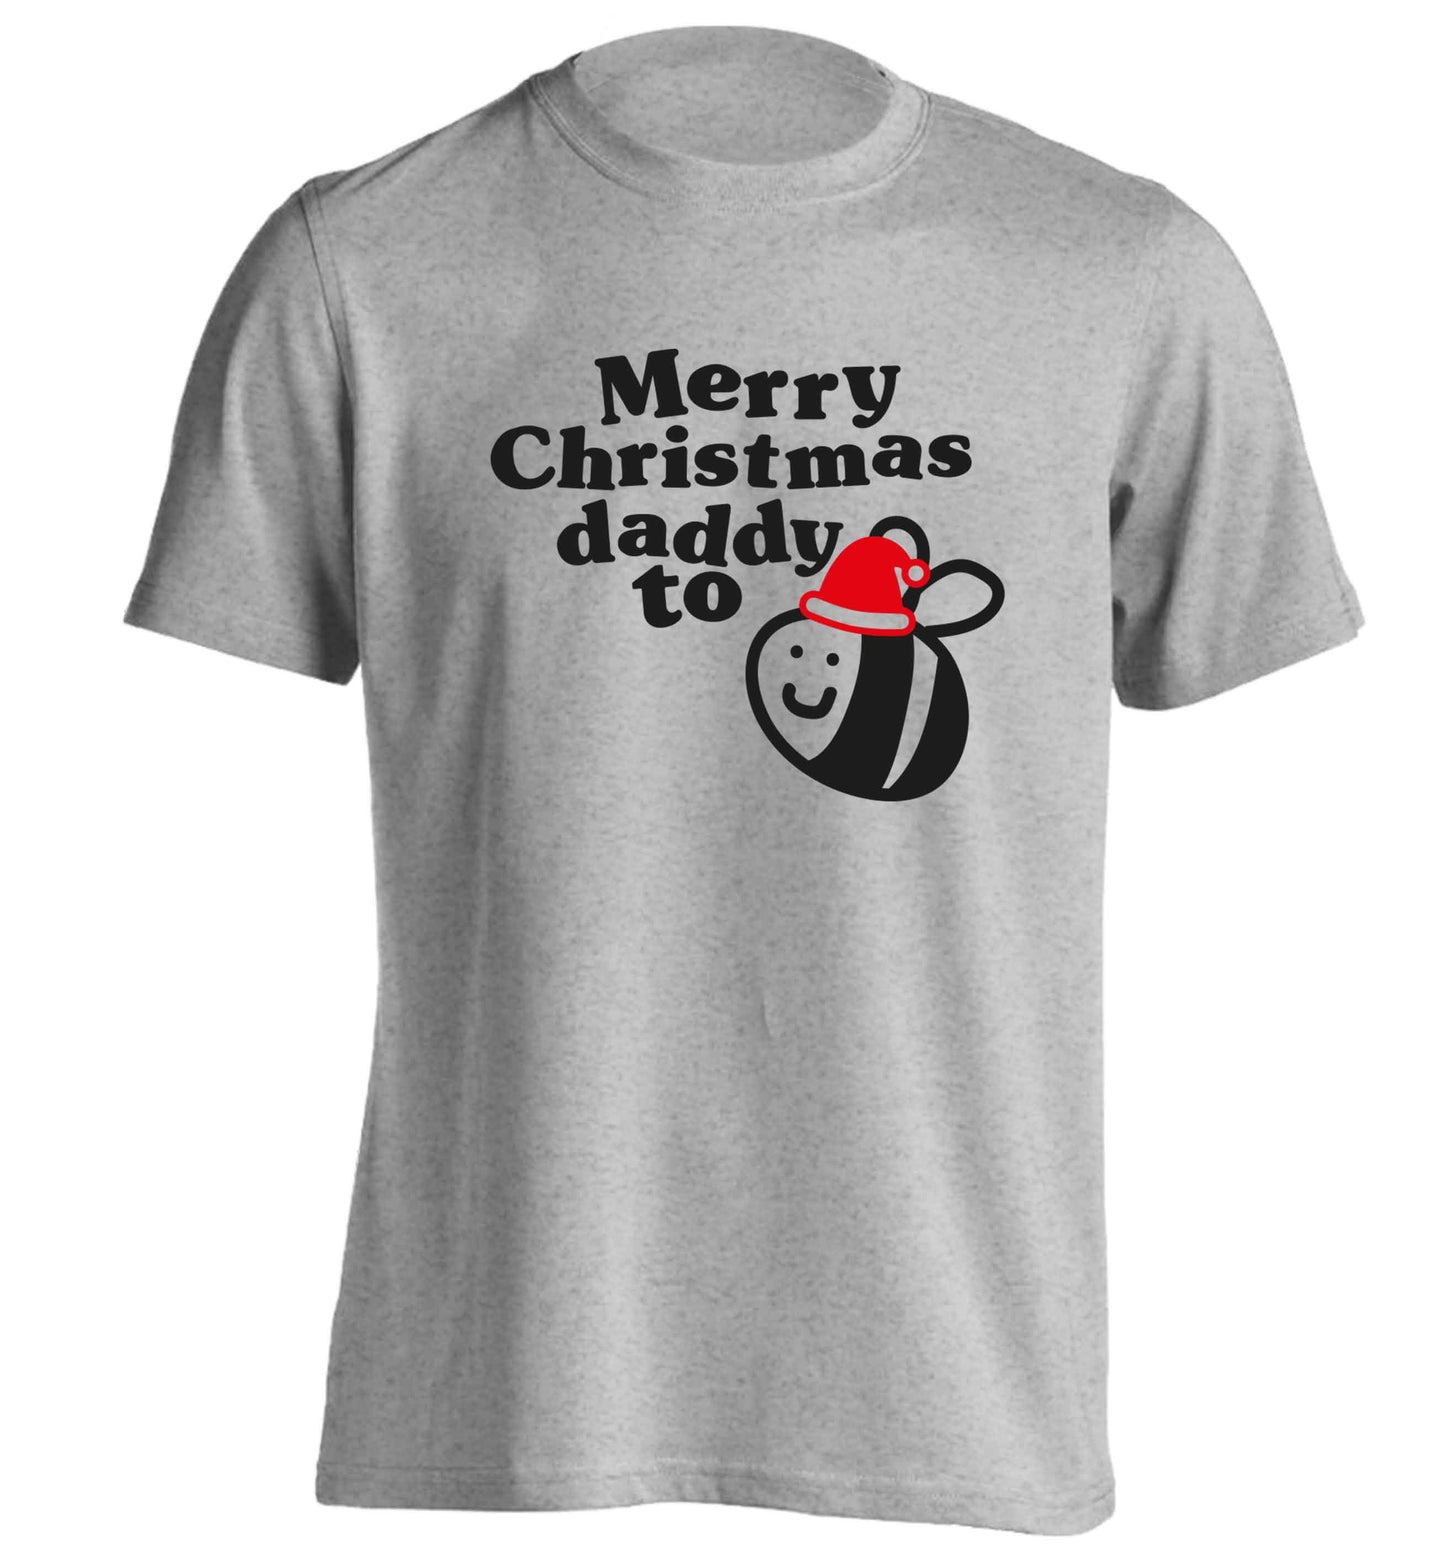 Merry Christmas daddy to be adults unisex grey Tshirt 2XL